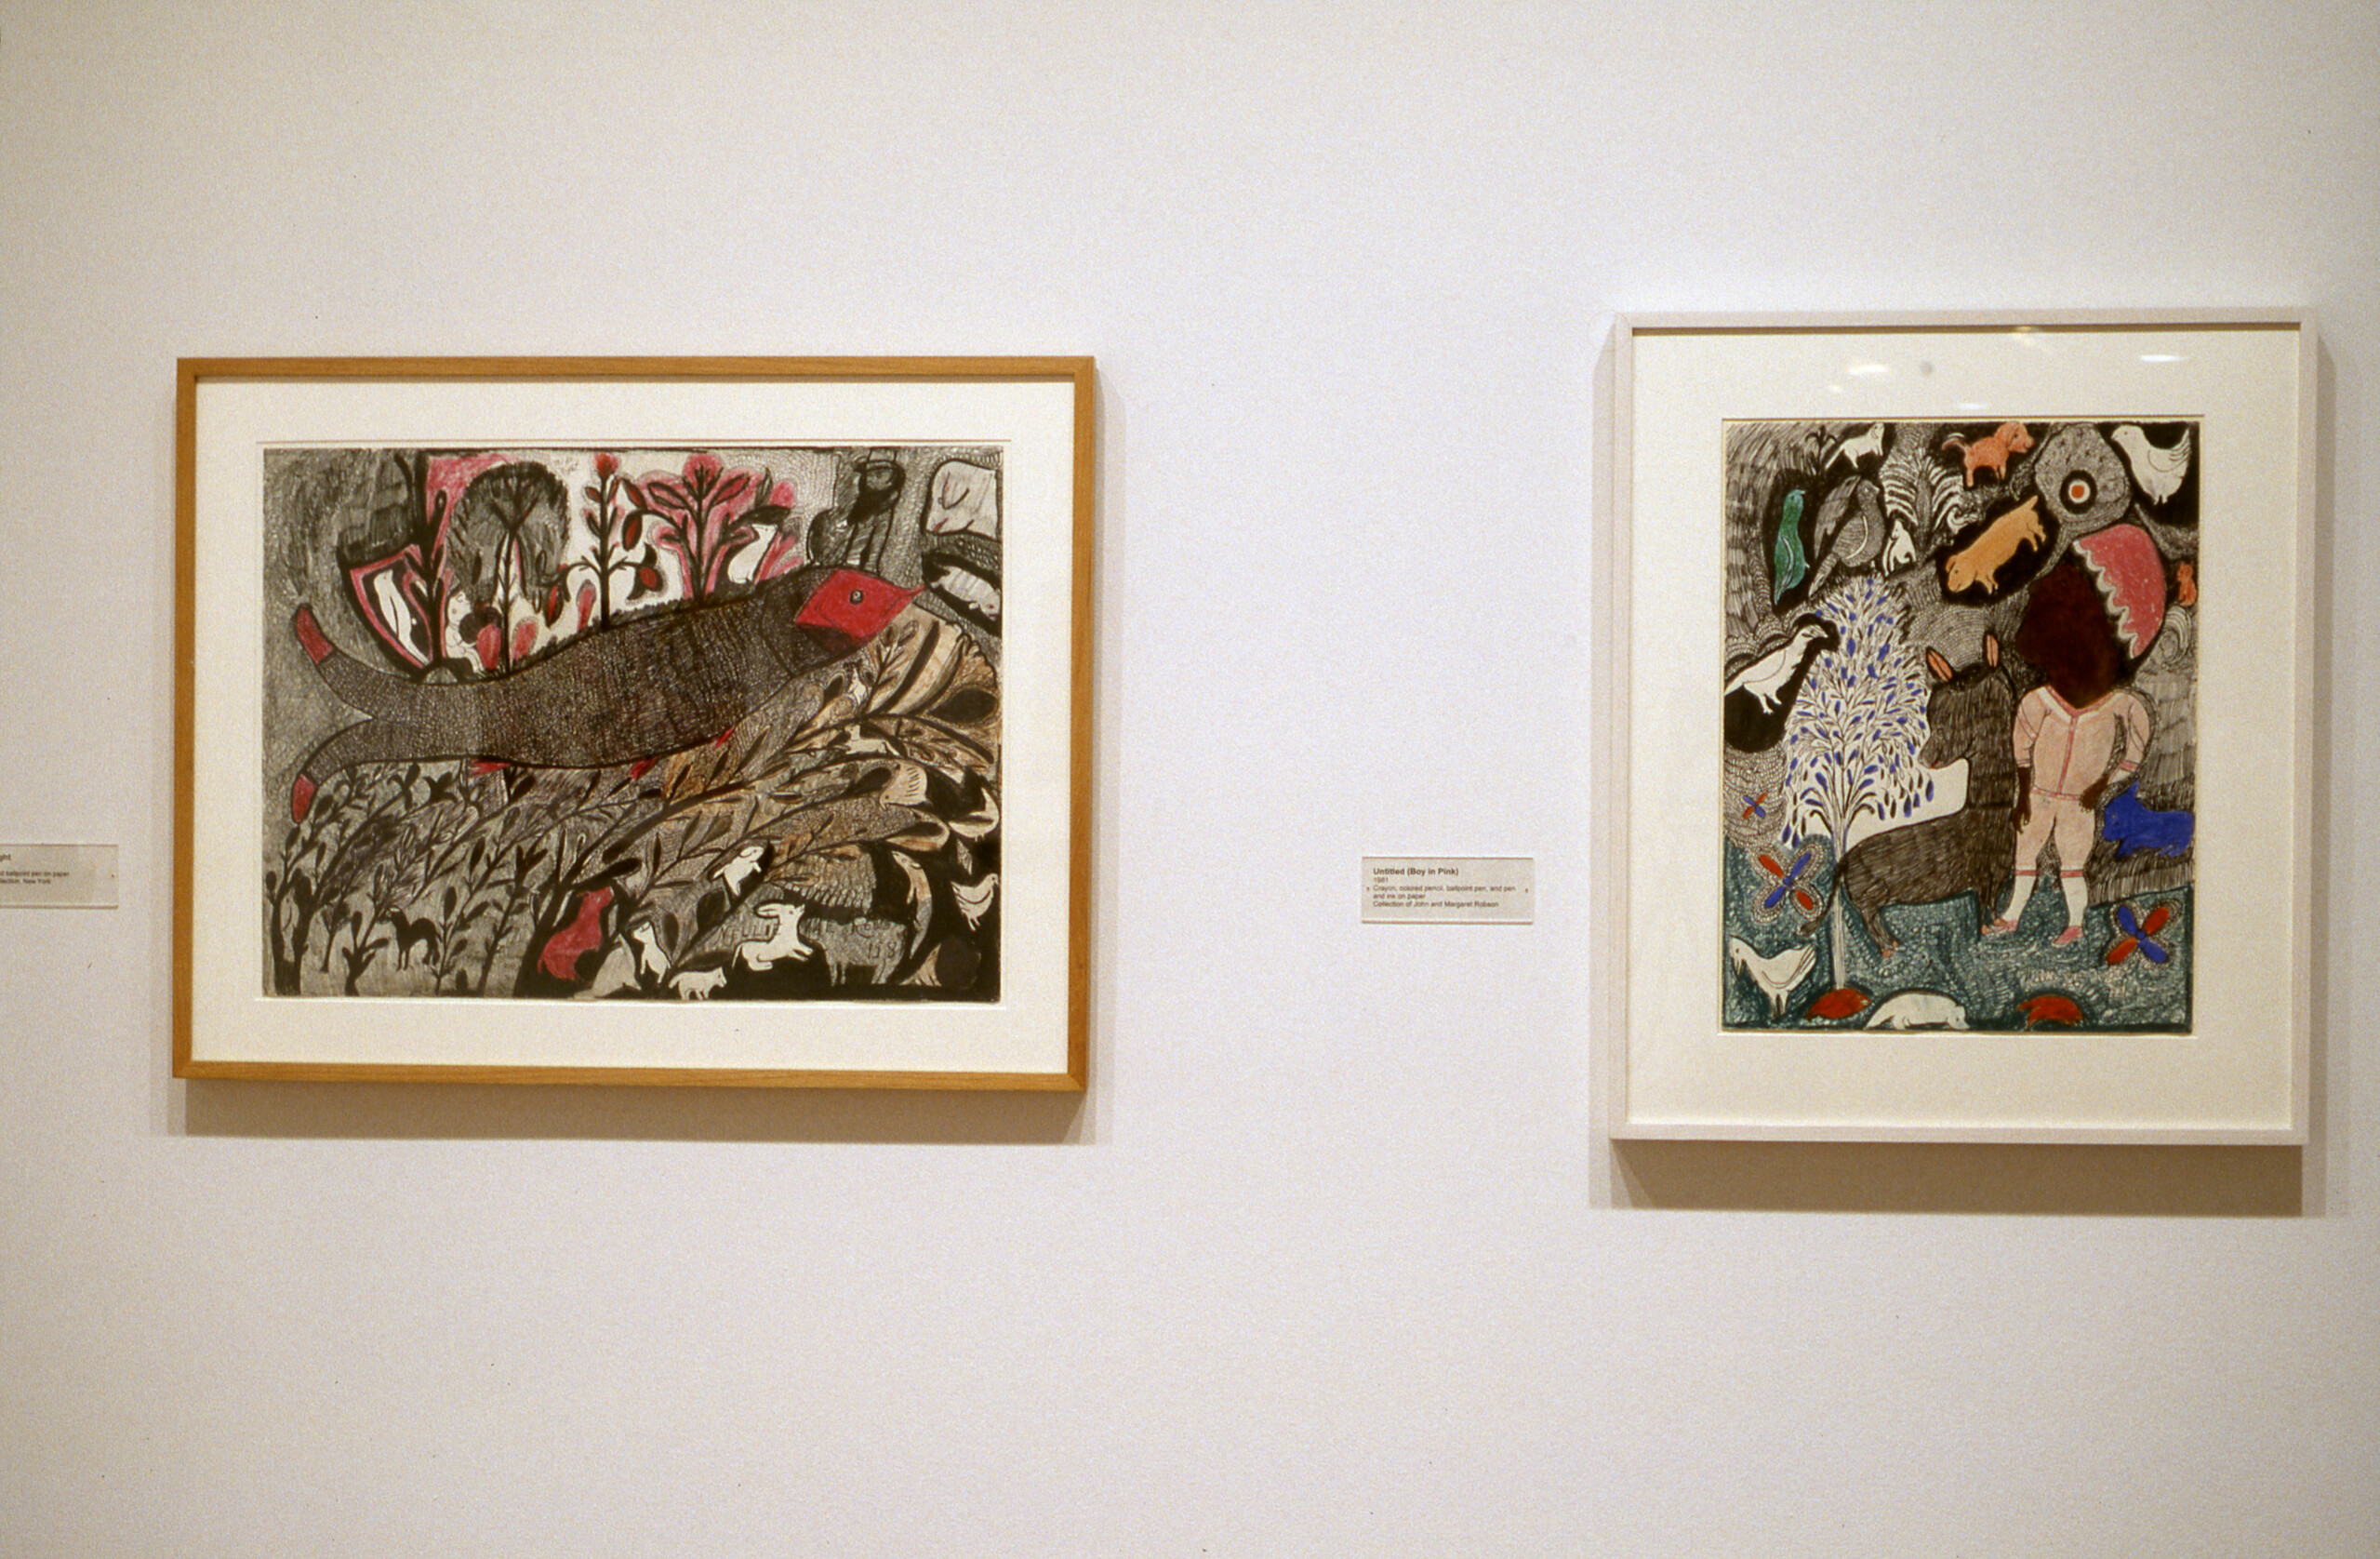 A view of an exhibition space shows two art works hanging on a wall next to each other. The drawings depict colorful animals and people before a gray background.